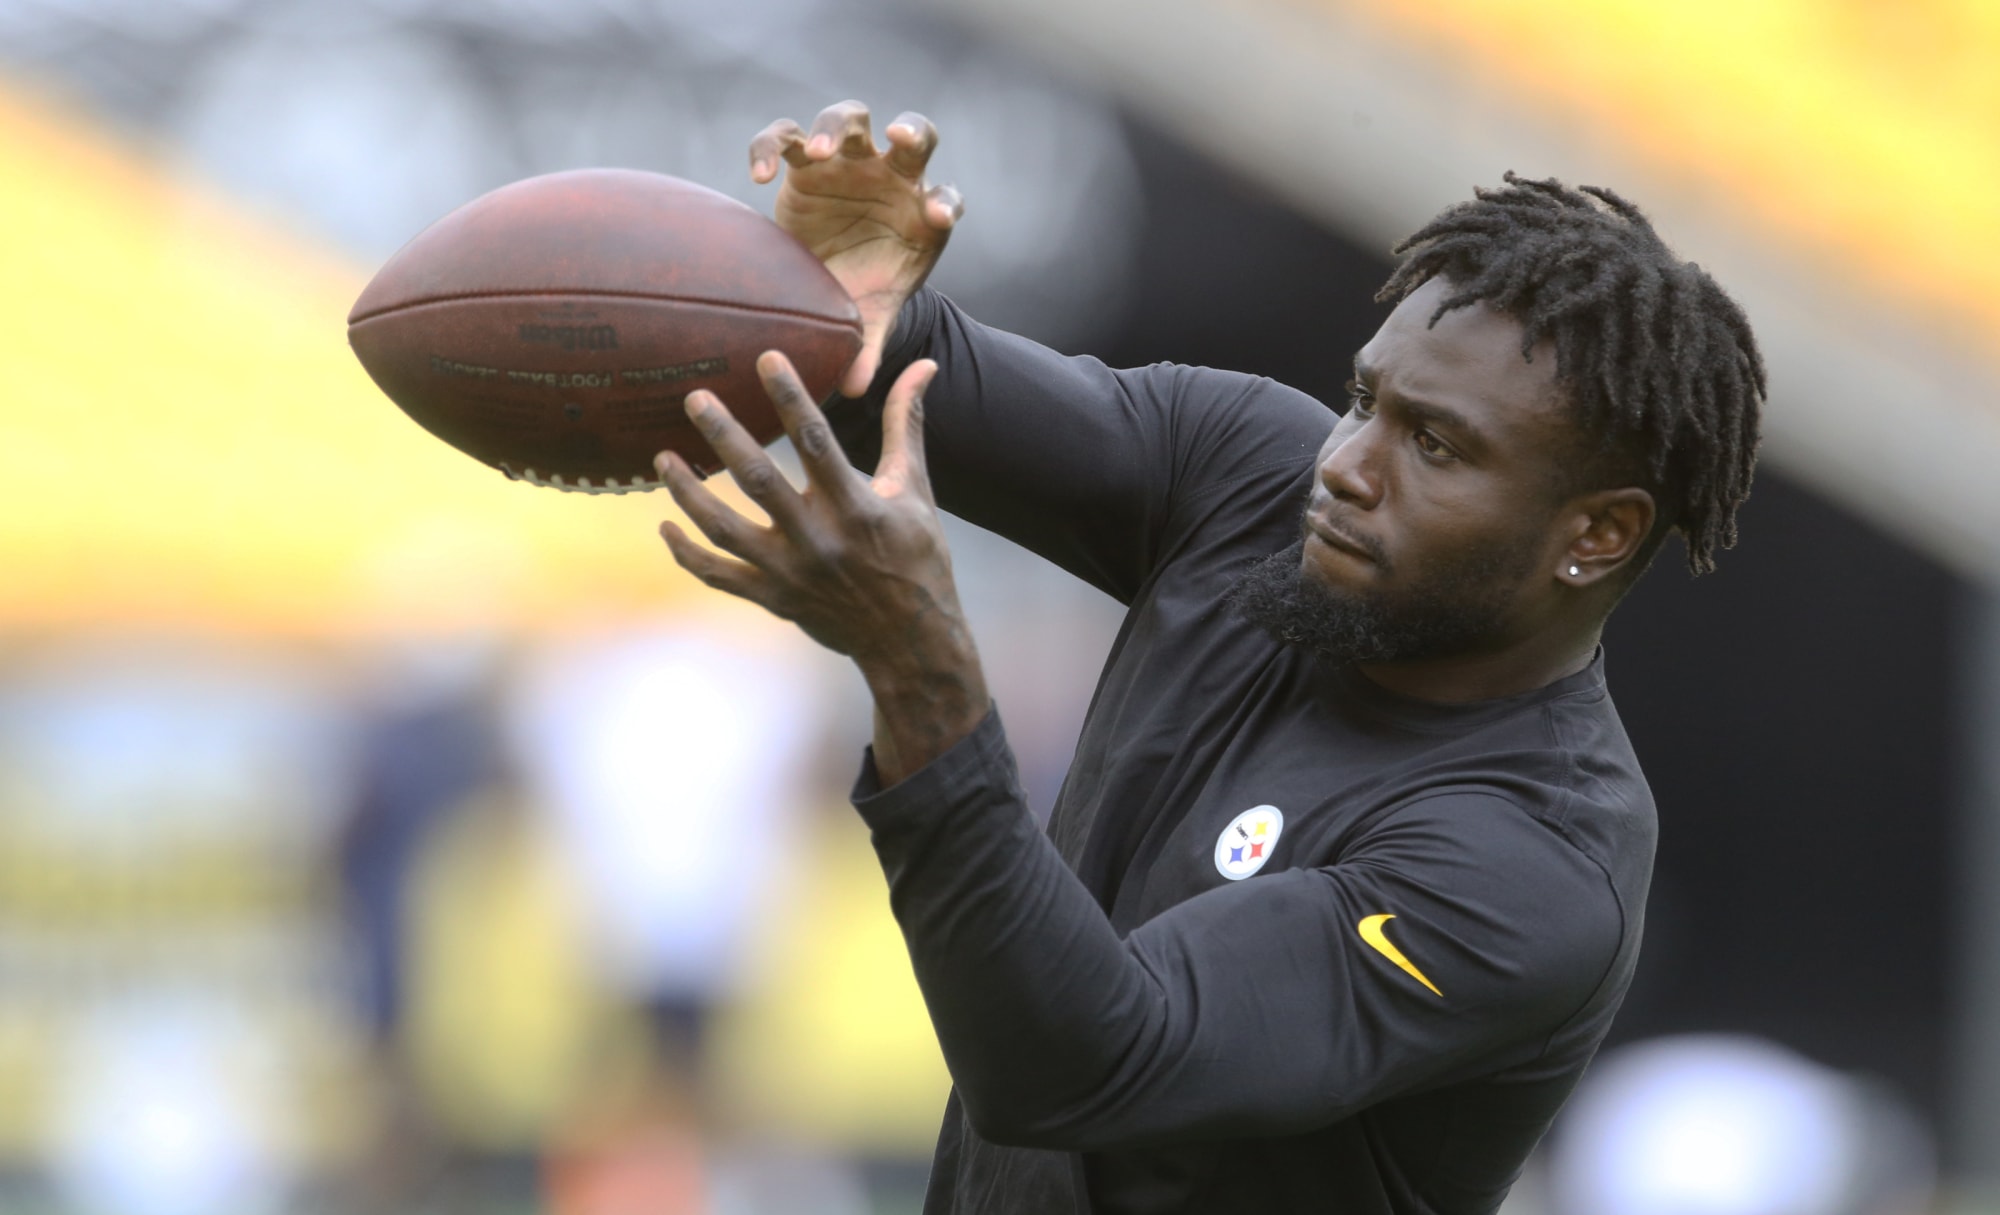 Steelers are ‘virtually’ injury free according to Coach Mike Tomlin